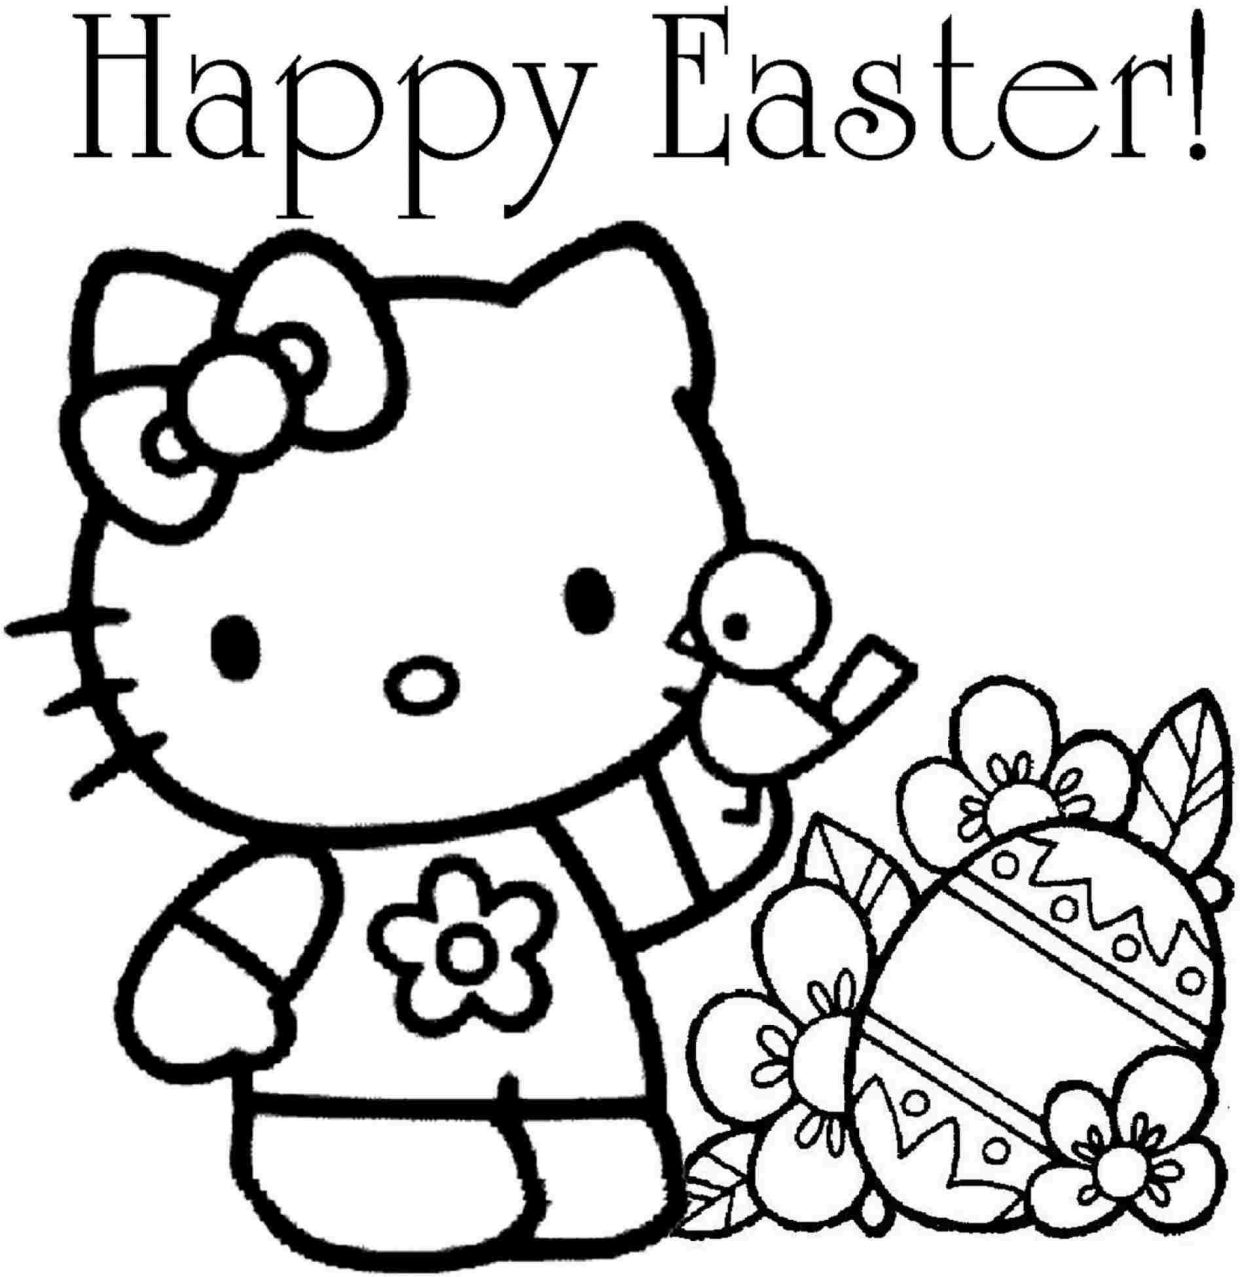 hello kitty and family coloring pages